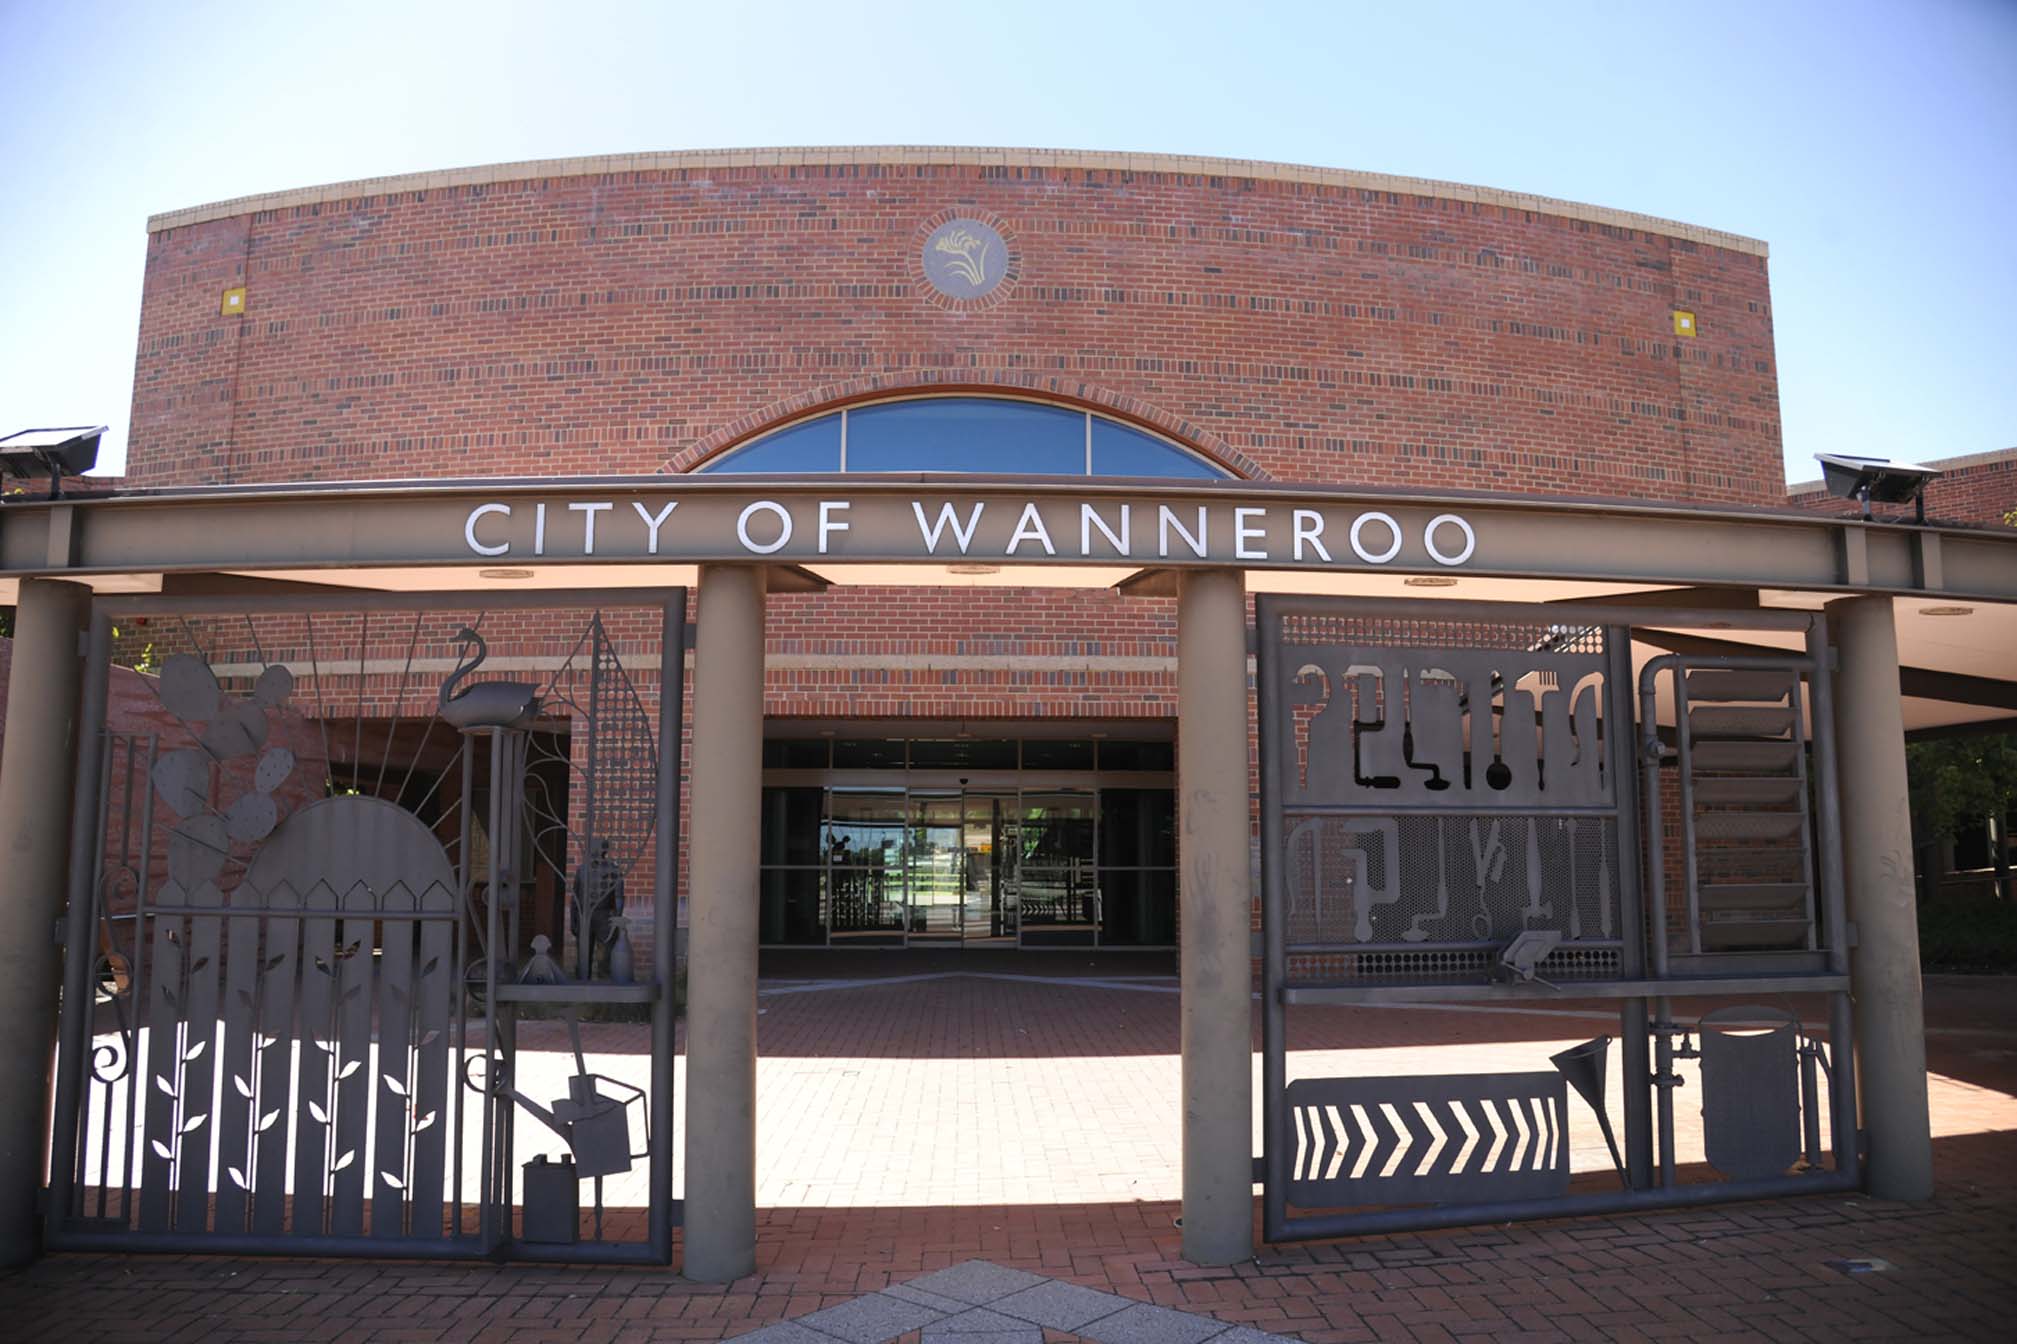 City of Wanneroo Civic Centre 2